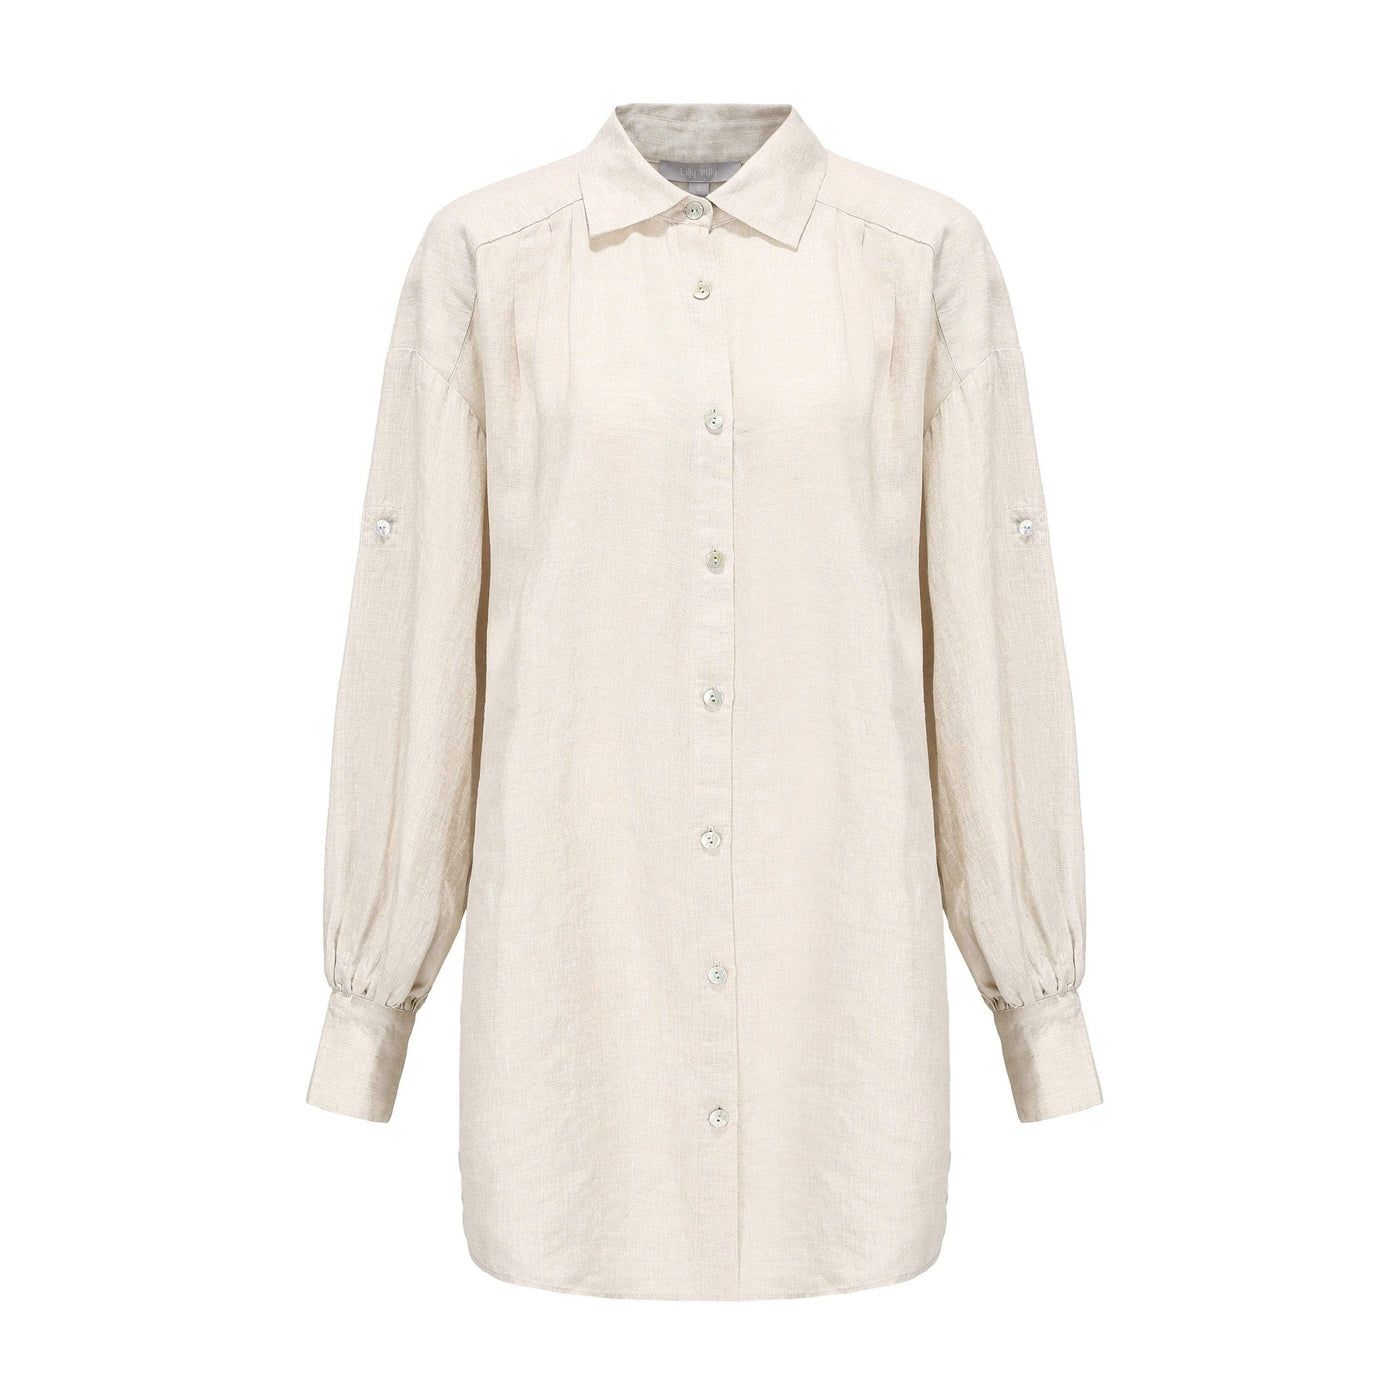 Lilly Pilly Collection 100% organic linen Billie Shirt Dress in Oatmeal as 3D image showing front view